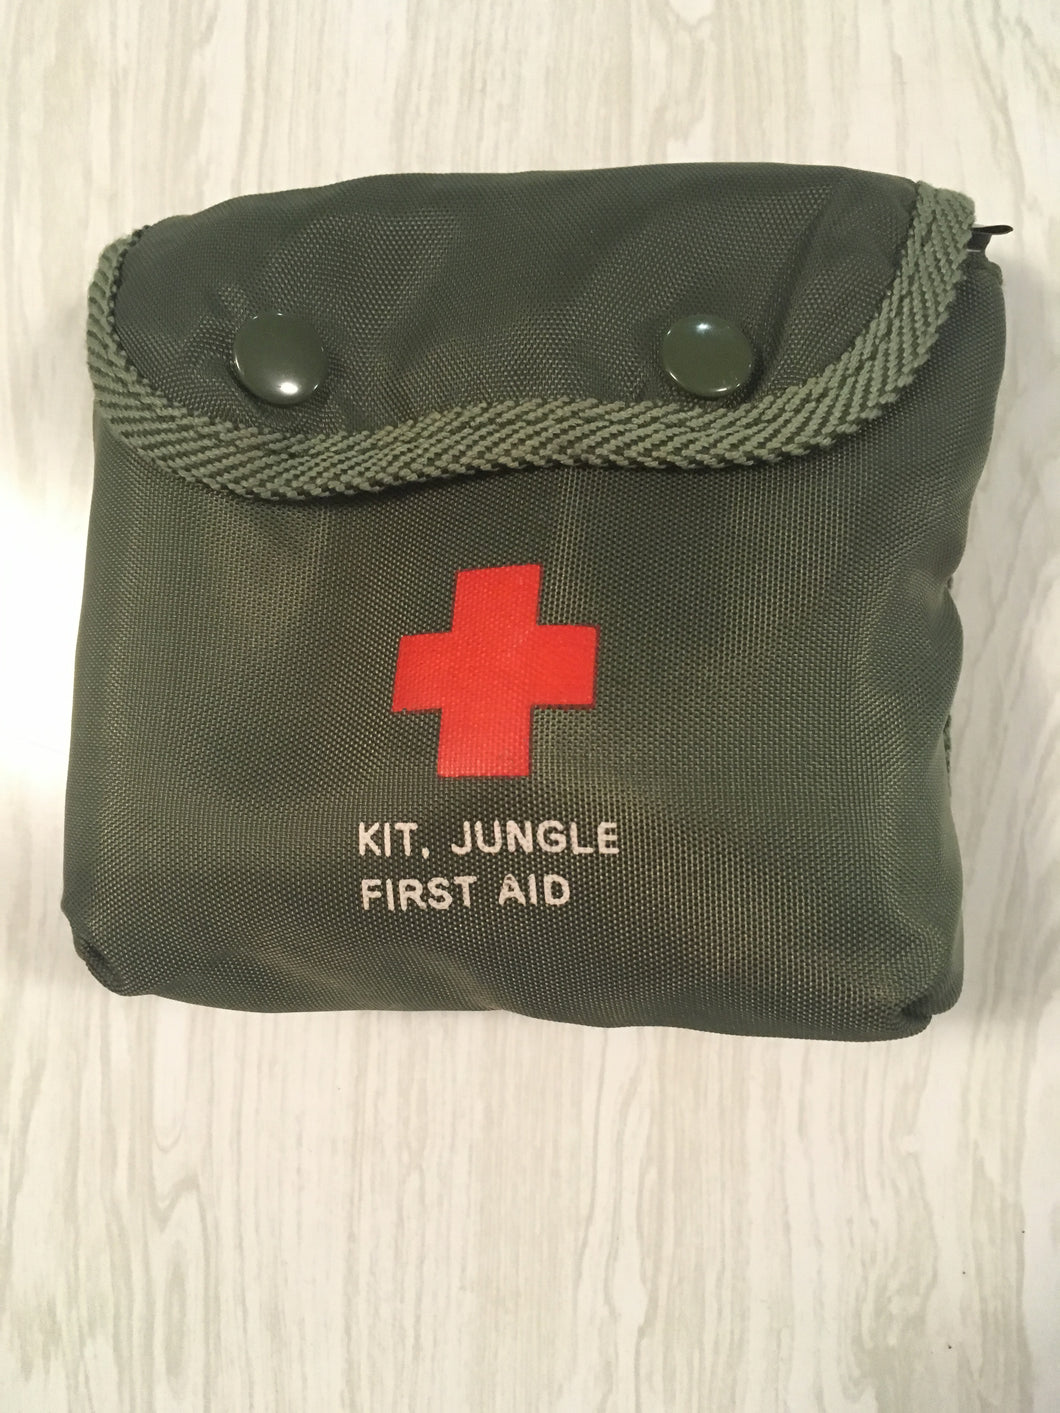 Nylon 2 Snap Jungle First Aid Kit With Contents/Uncertain Year, Bandage From 1990